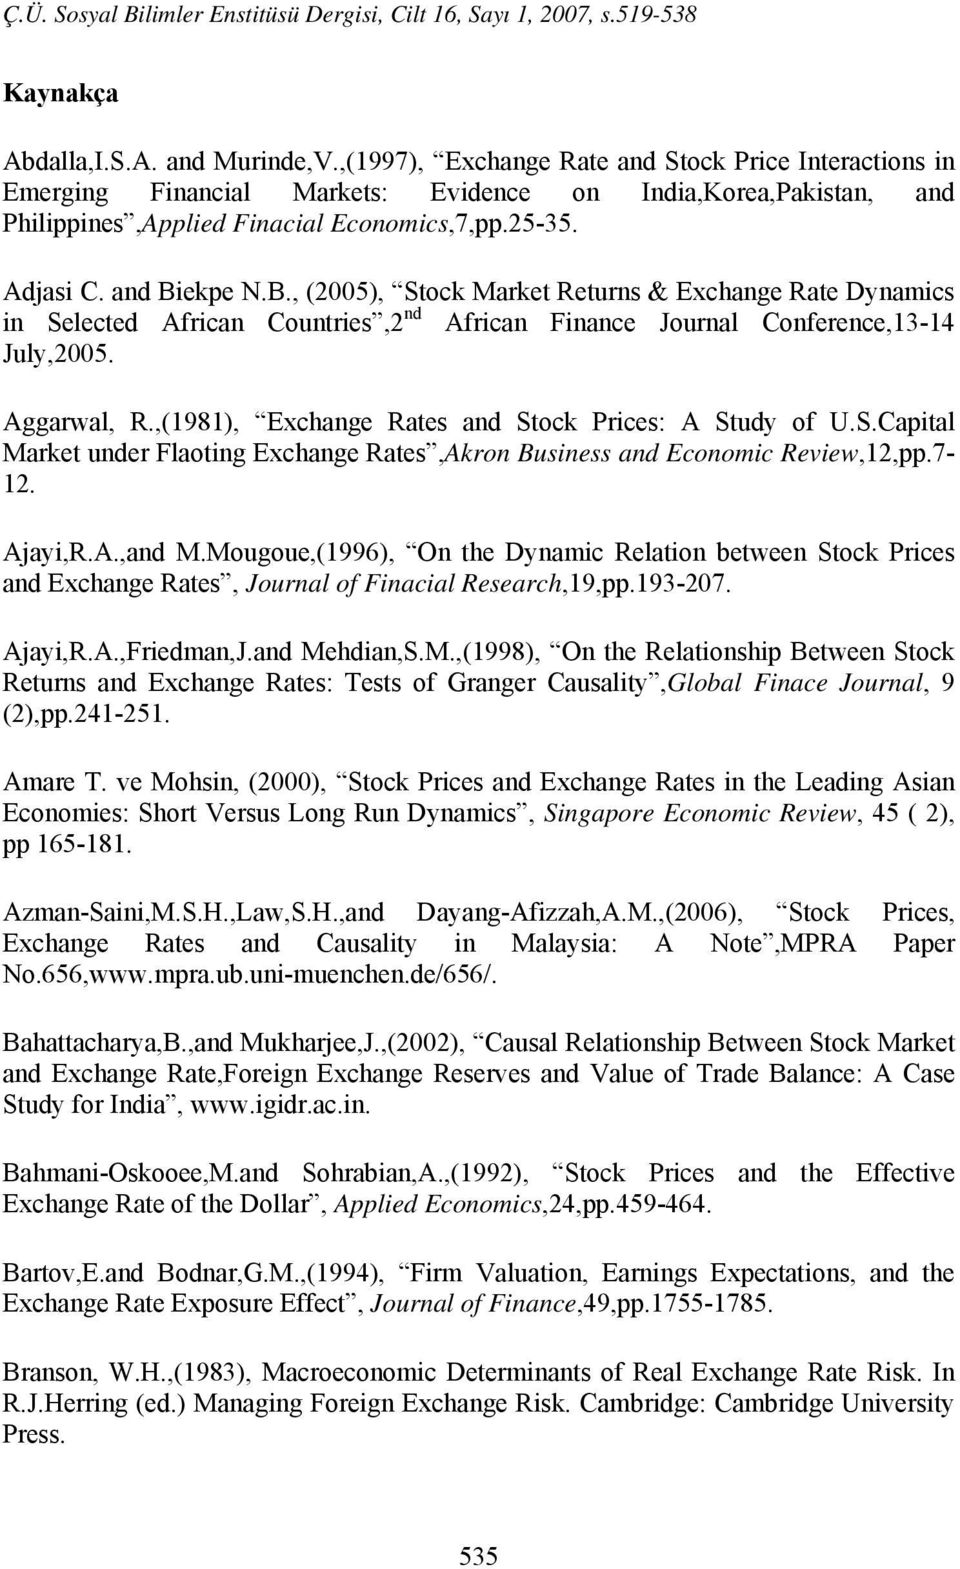 ekpe N.B., (2005), Stock Market Returns & Exchange Rate Dynamics in Selected African Countries,2 nd African Finance Journal Conference,13-14 July,2005. Aggarwal, R.